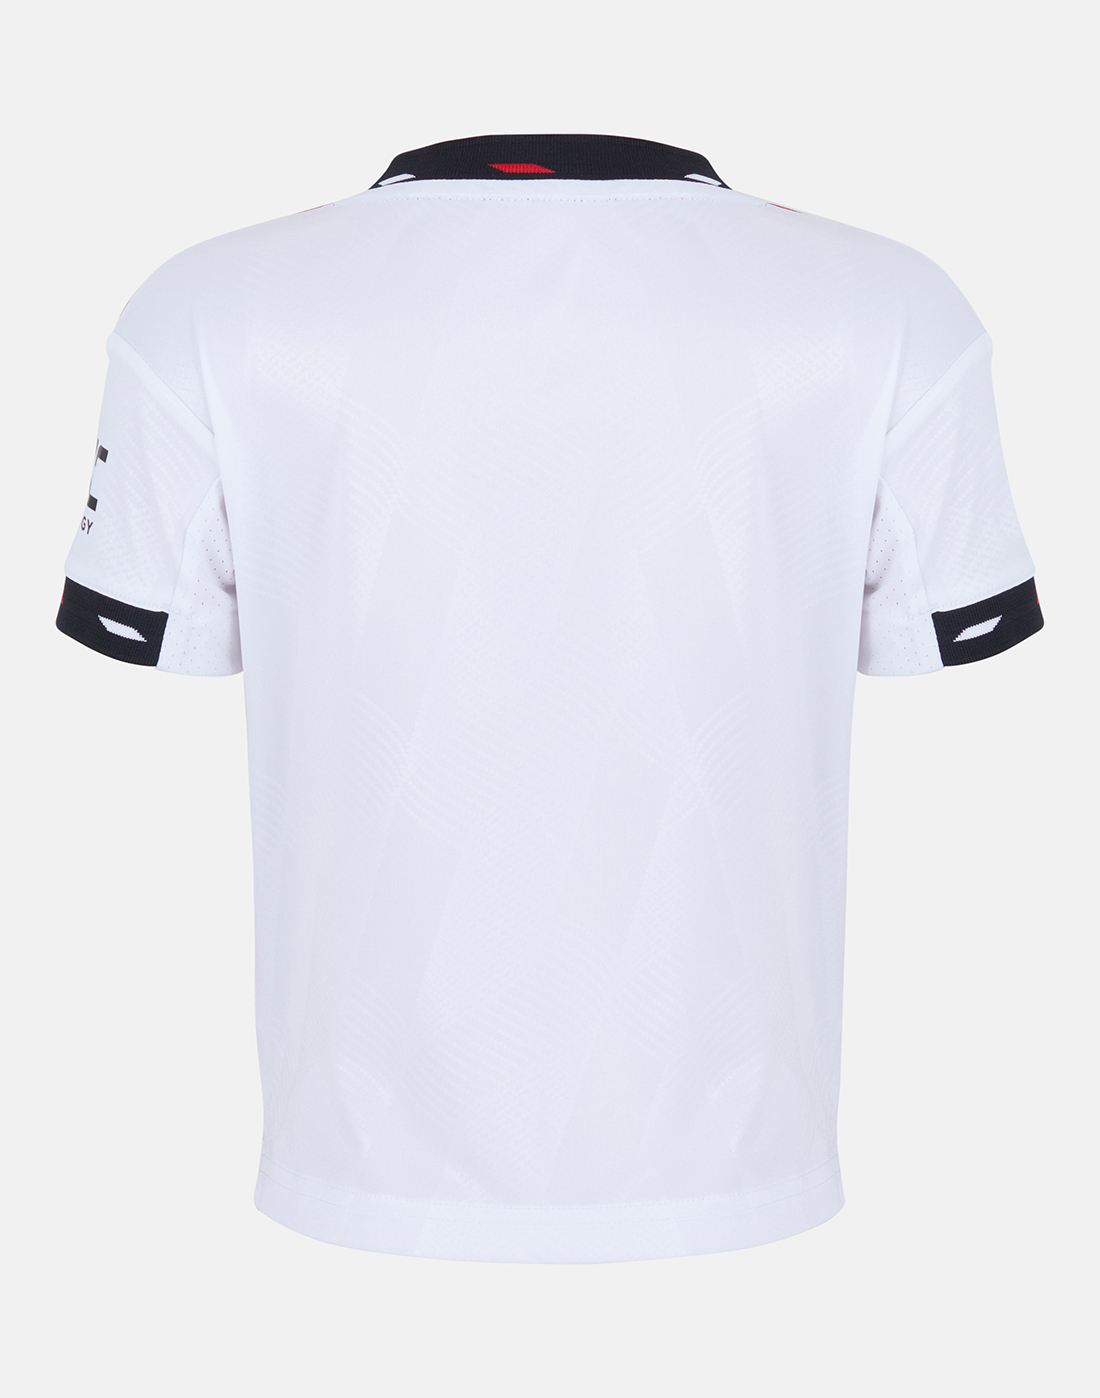 adidas Pre School Manchester United 22/23 Away Kit - White | Life Style ...